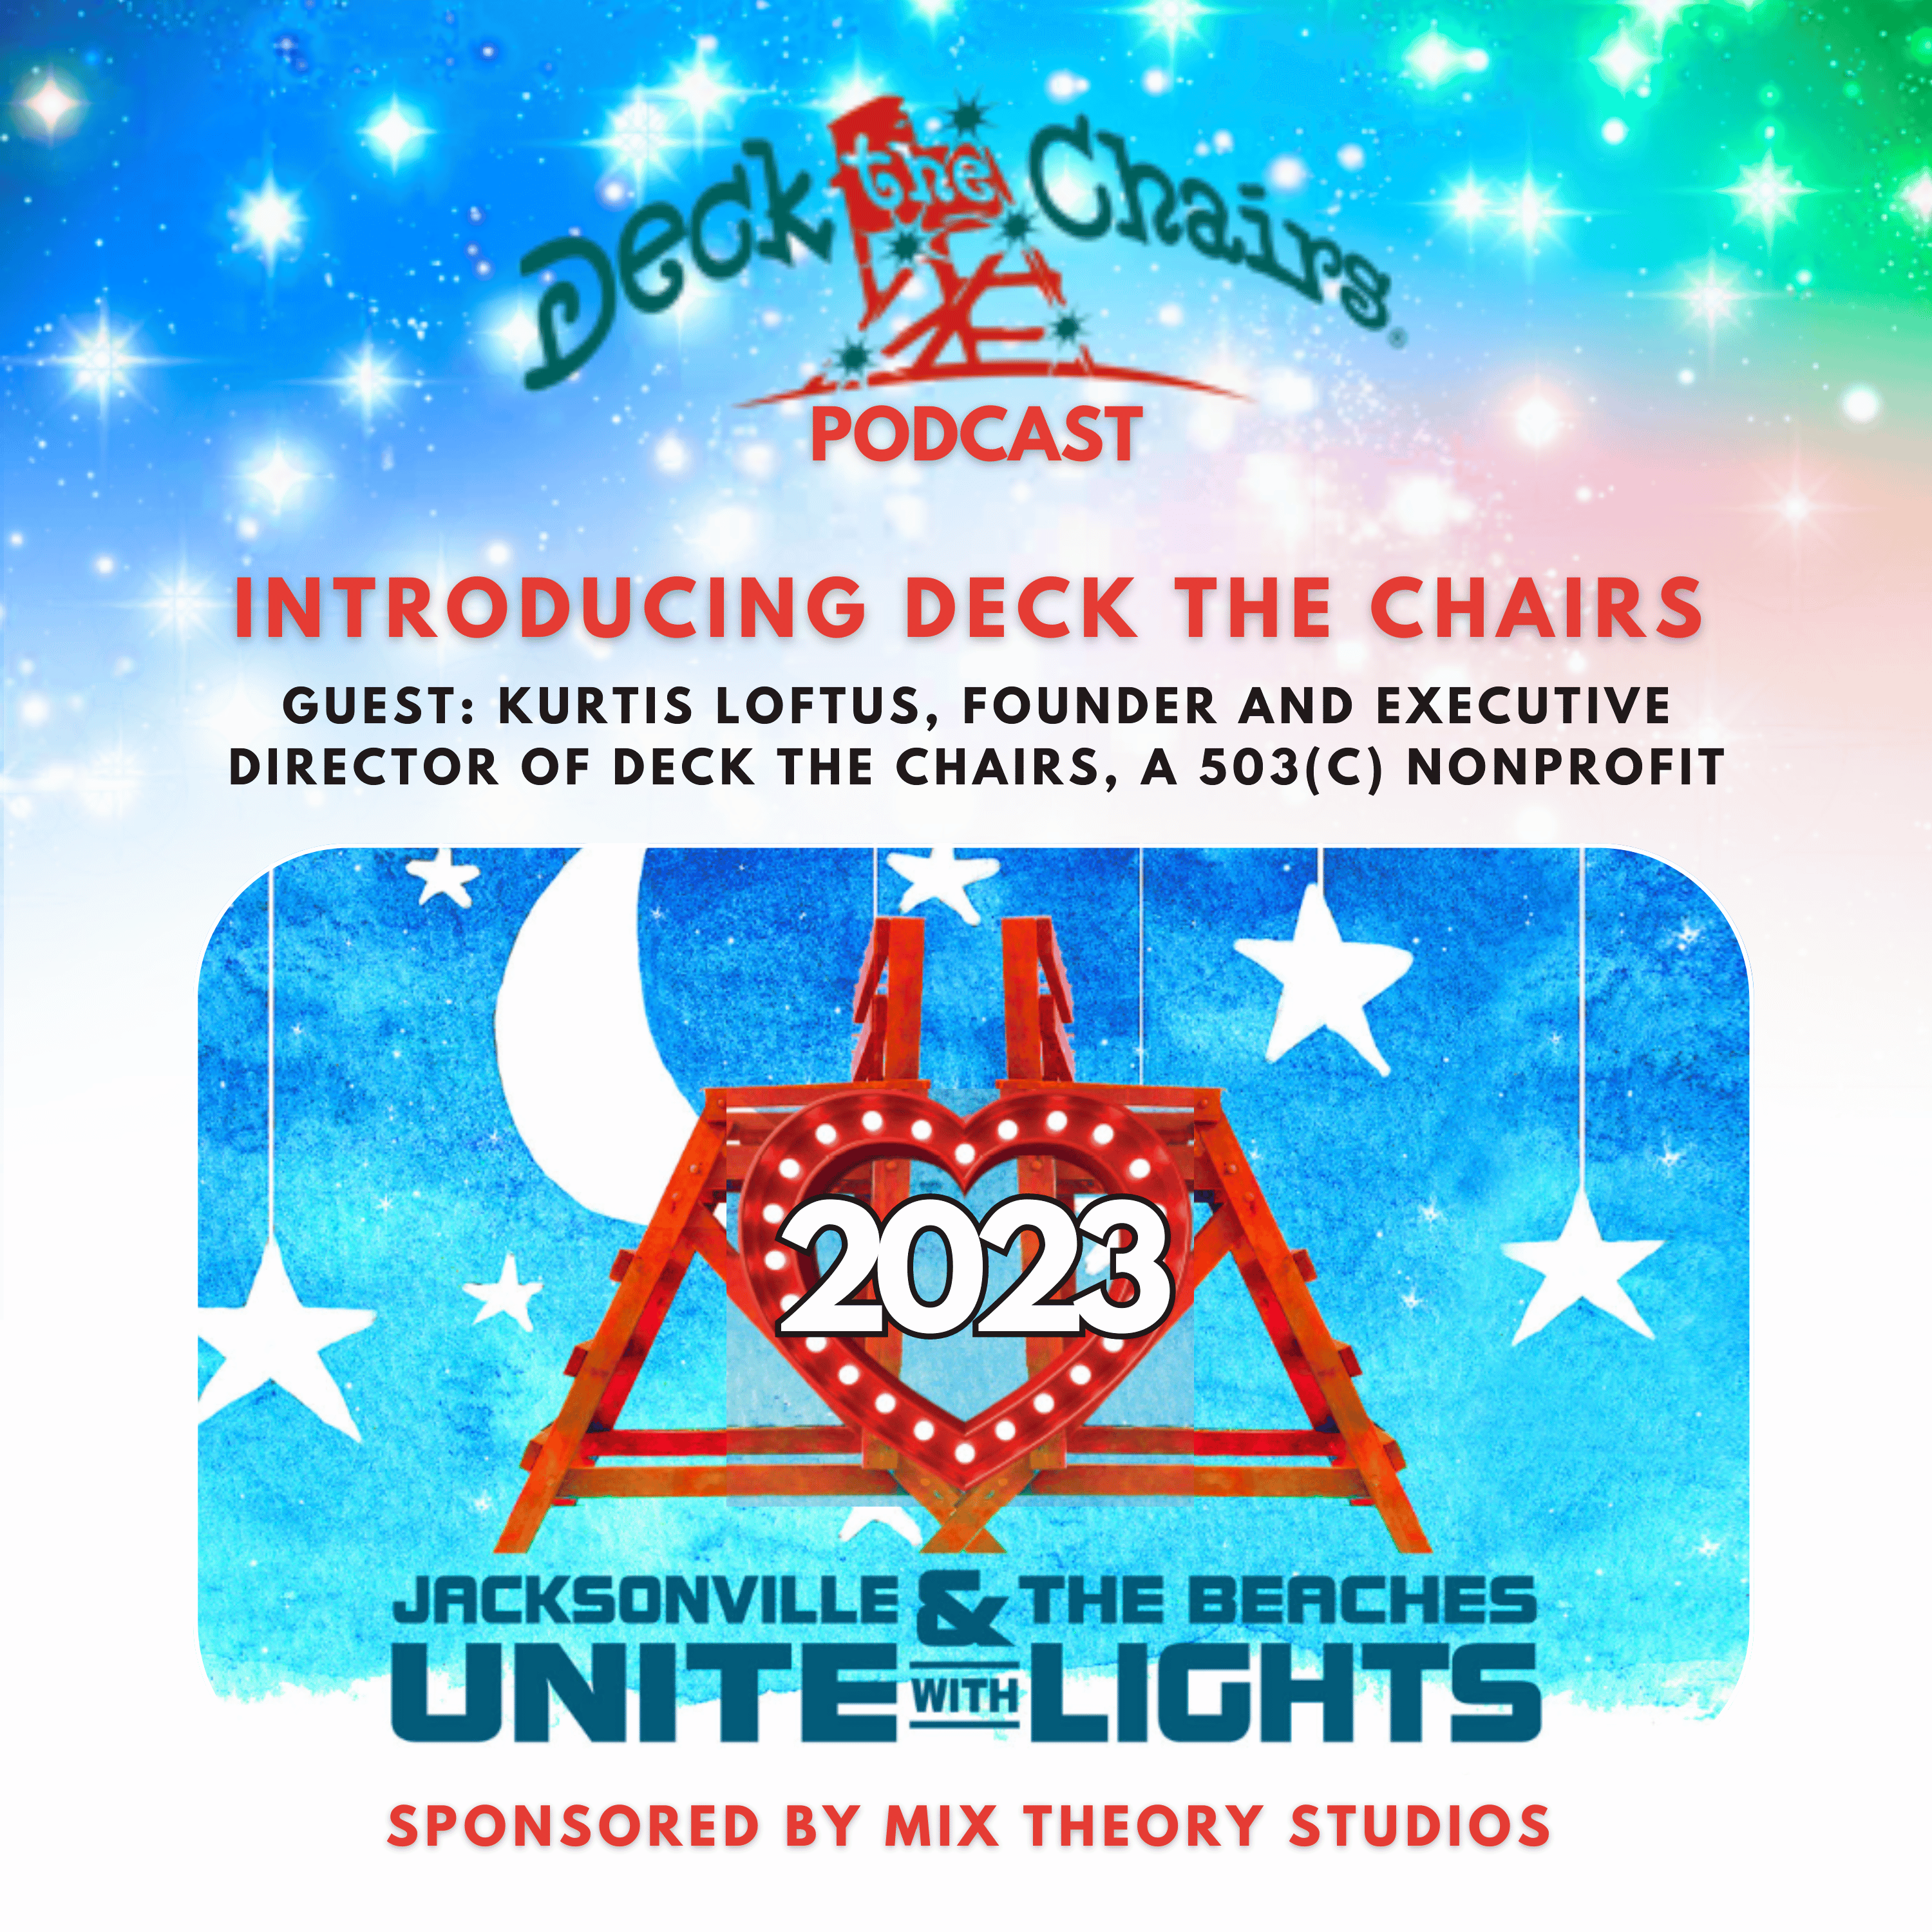 Episode 1: Introducing Deck the Chairs